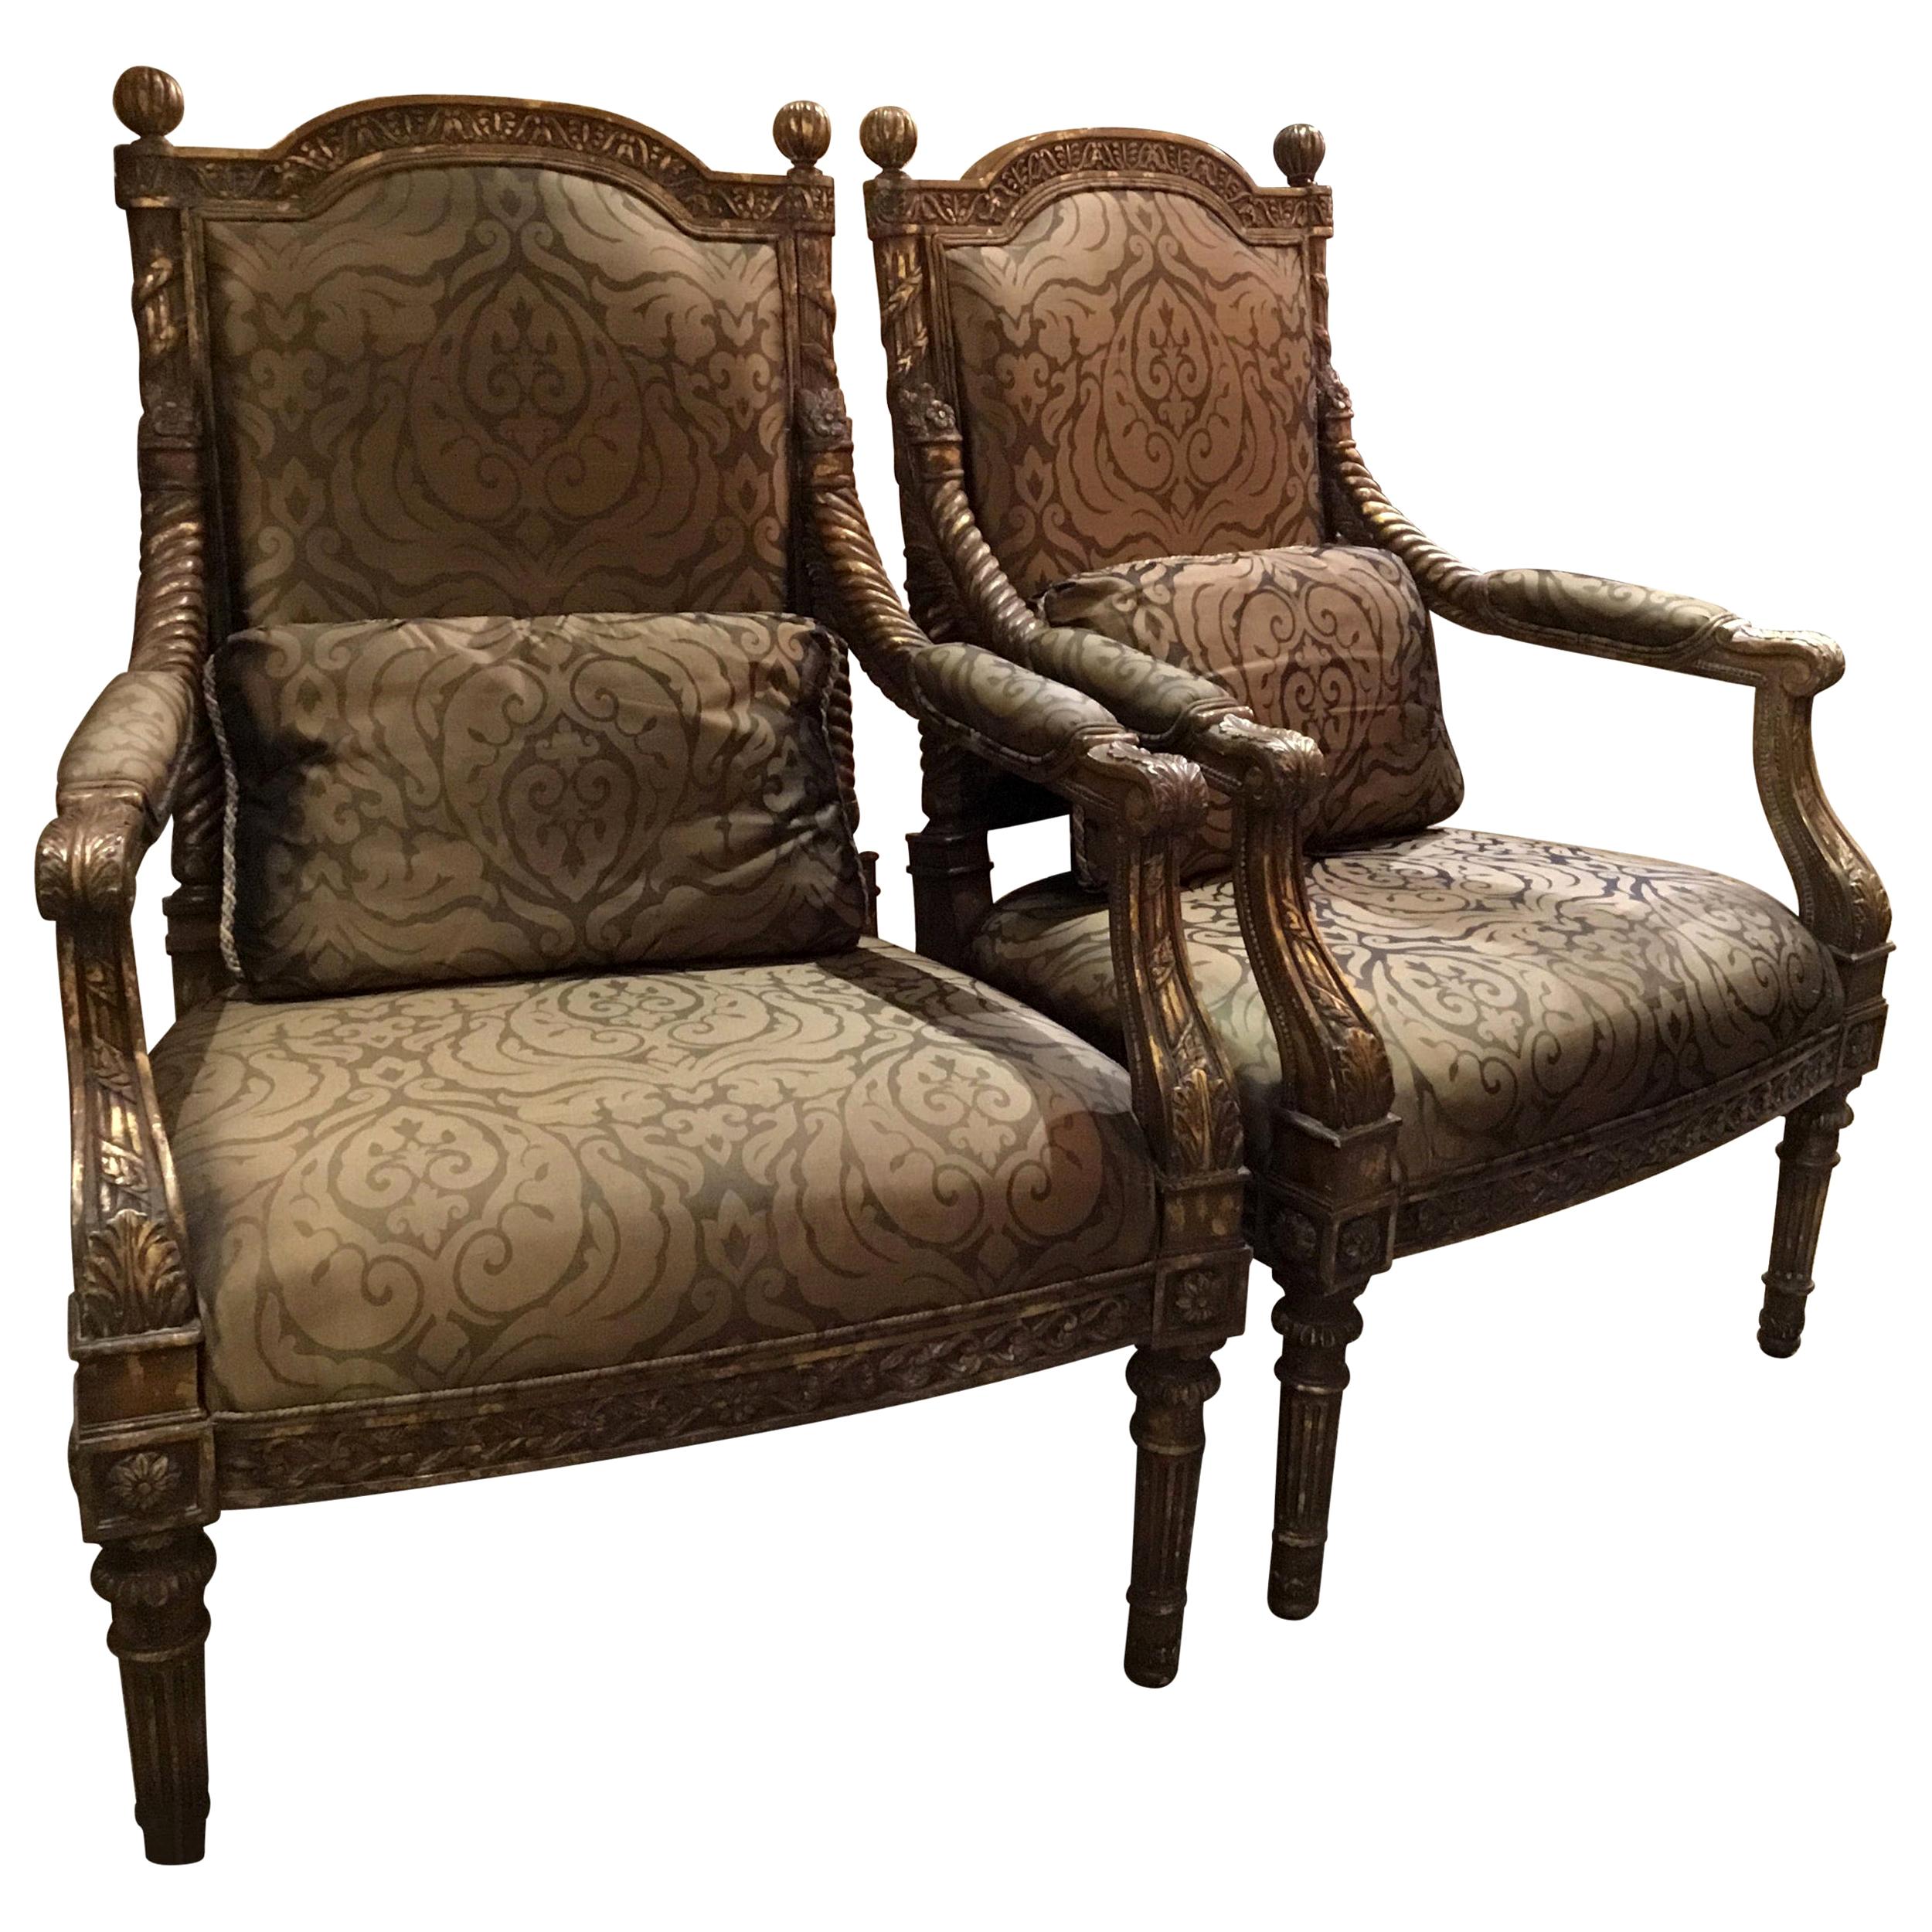 Pair of Louis XVI Style Chairs with Silk Upholstery